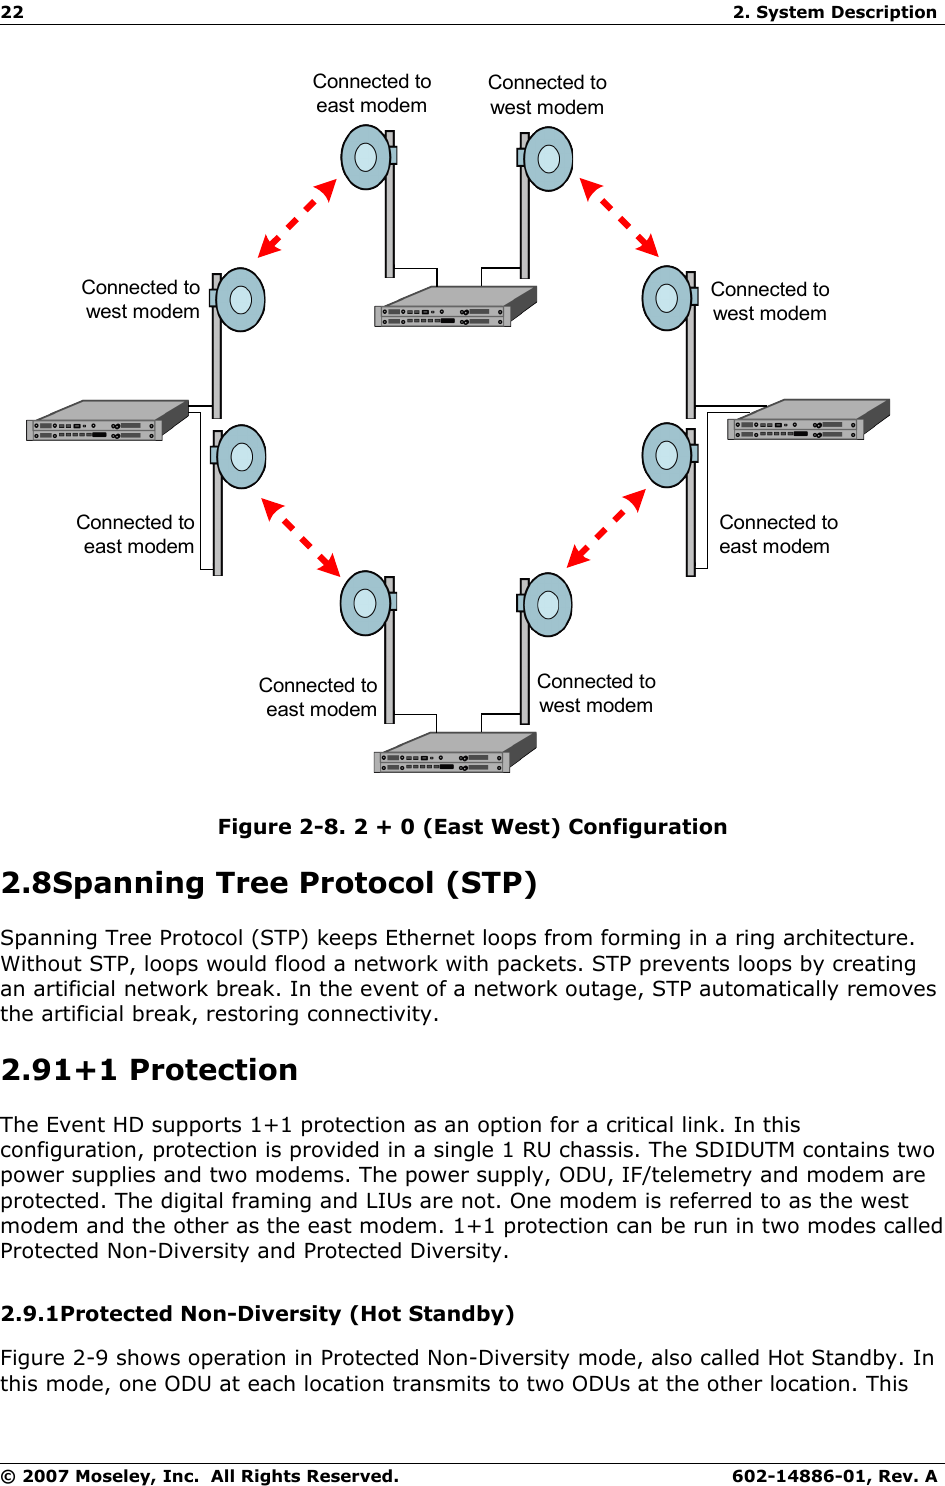 22 2. System DescriptionConnected toeast modemConnected towest modemConnected toeast modemConnected towest modemConnected towest modemConnected toeast modemConnected towest modemConnected toeast modemFigure 2-8. 2 + 0 (East West) Configuration2.8Spanning Tree Protocol (STP)Spanning Tree Protocol (STP) keeps Ethernet loops from forming in a ring architecture. Without STP, loops would flood a network with packets. STP prevents loops by creating an artificial network break. In the event of a network outage, STP automatically removes the artificial break, restoring connectivity.2.91+1 ProtectionThe Event HD supports 1+1 protection as an option for a critical link. In this configuration, protection is provided in a single 1 RU chassis. The SDIDUTM contains two power supplies and two modems. The power supply, ODU, IF/telemetry and modem are protected. The digital framing and LIUs are not. One modem is referred to as the west modem and the other as the east modem. 1+1 protection can be run in two modes called Protected Non-Diversity and Protected Diversity. 2.9.1Protected Non-Diversity (Hot Standby)Figure 2-9 shows operation in Protected Non-Diversity mode, also called Hot Standby. In this mode, one ODU at each location transmits to two ODUs at the other location. This © 2007 Moseley, Inc.  All Rights Reserved. 602-14886-01, Rev. A